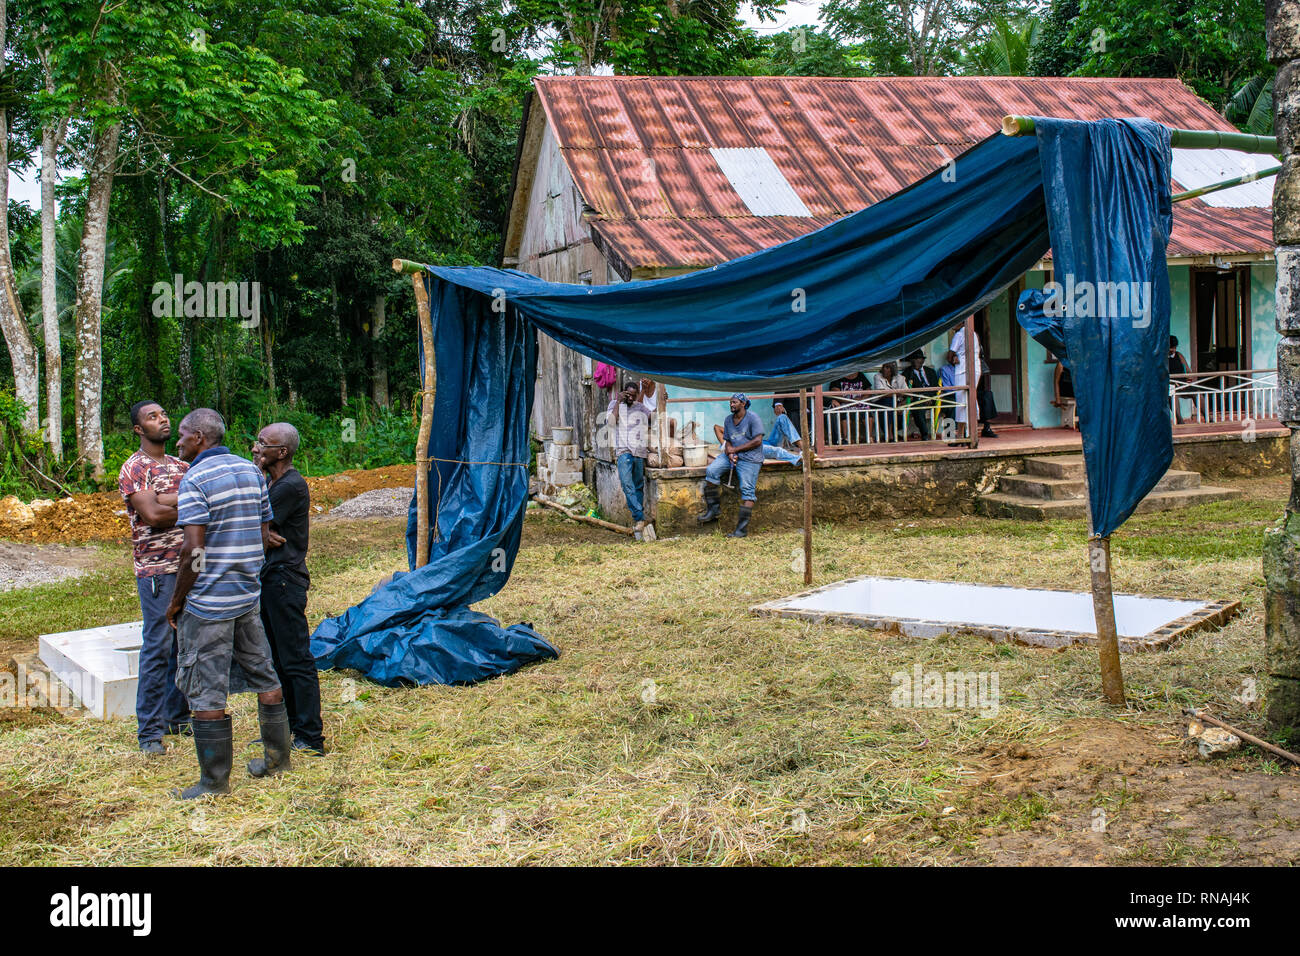 Saint Mary, Jamaica - January 07 2017: Scene at a cemetery as mourners gather for burial service of a deceased member of their community. Stock Photo